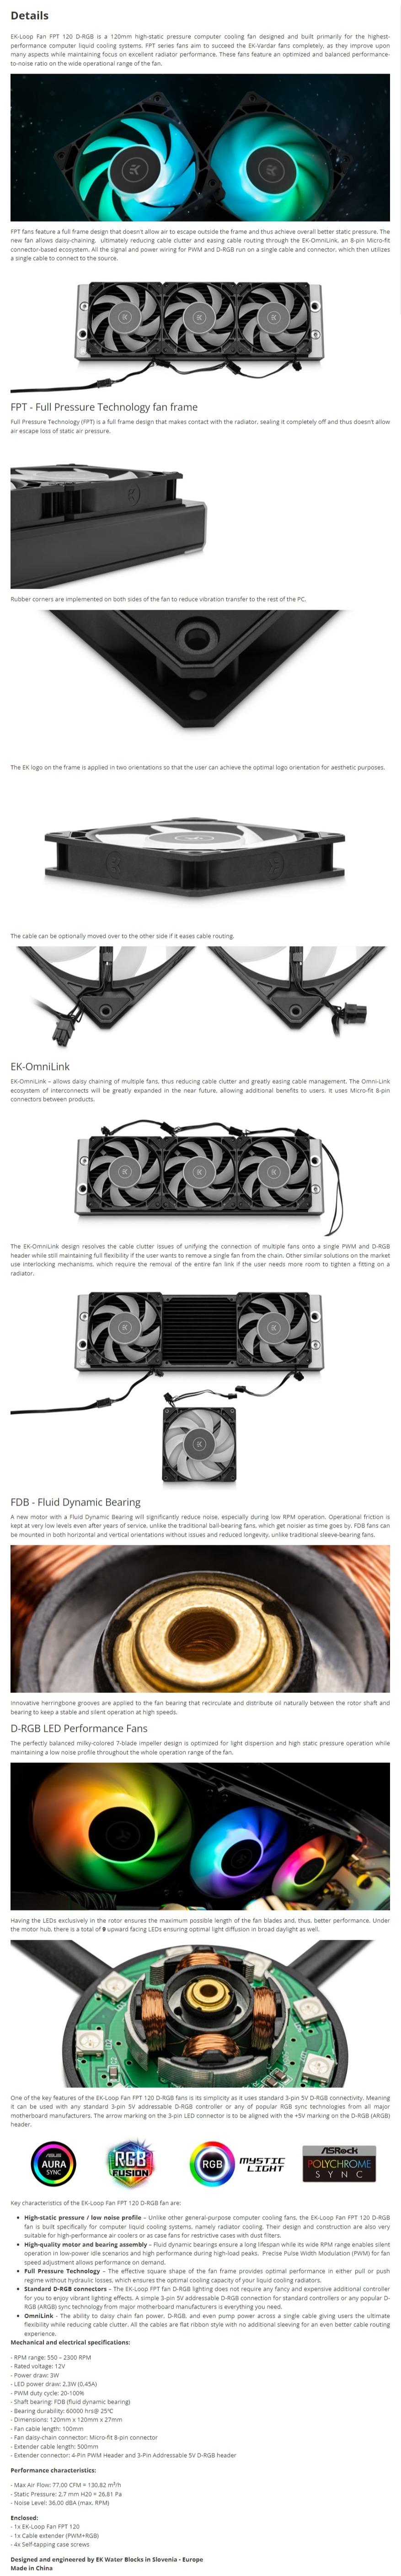 A large marketing image providing additional information about the product EK Loop FPT D-RGB 120mm Fan - Black - Additional alt info not provided